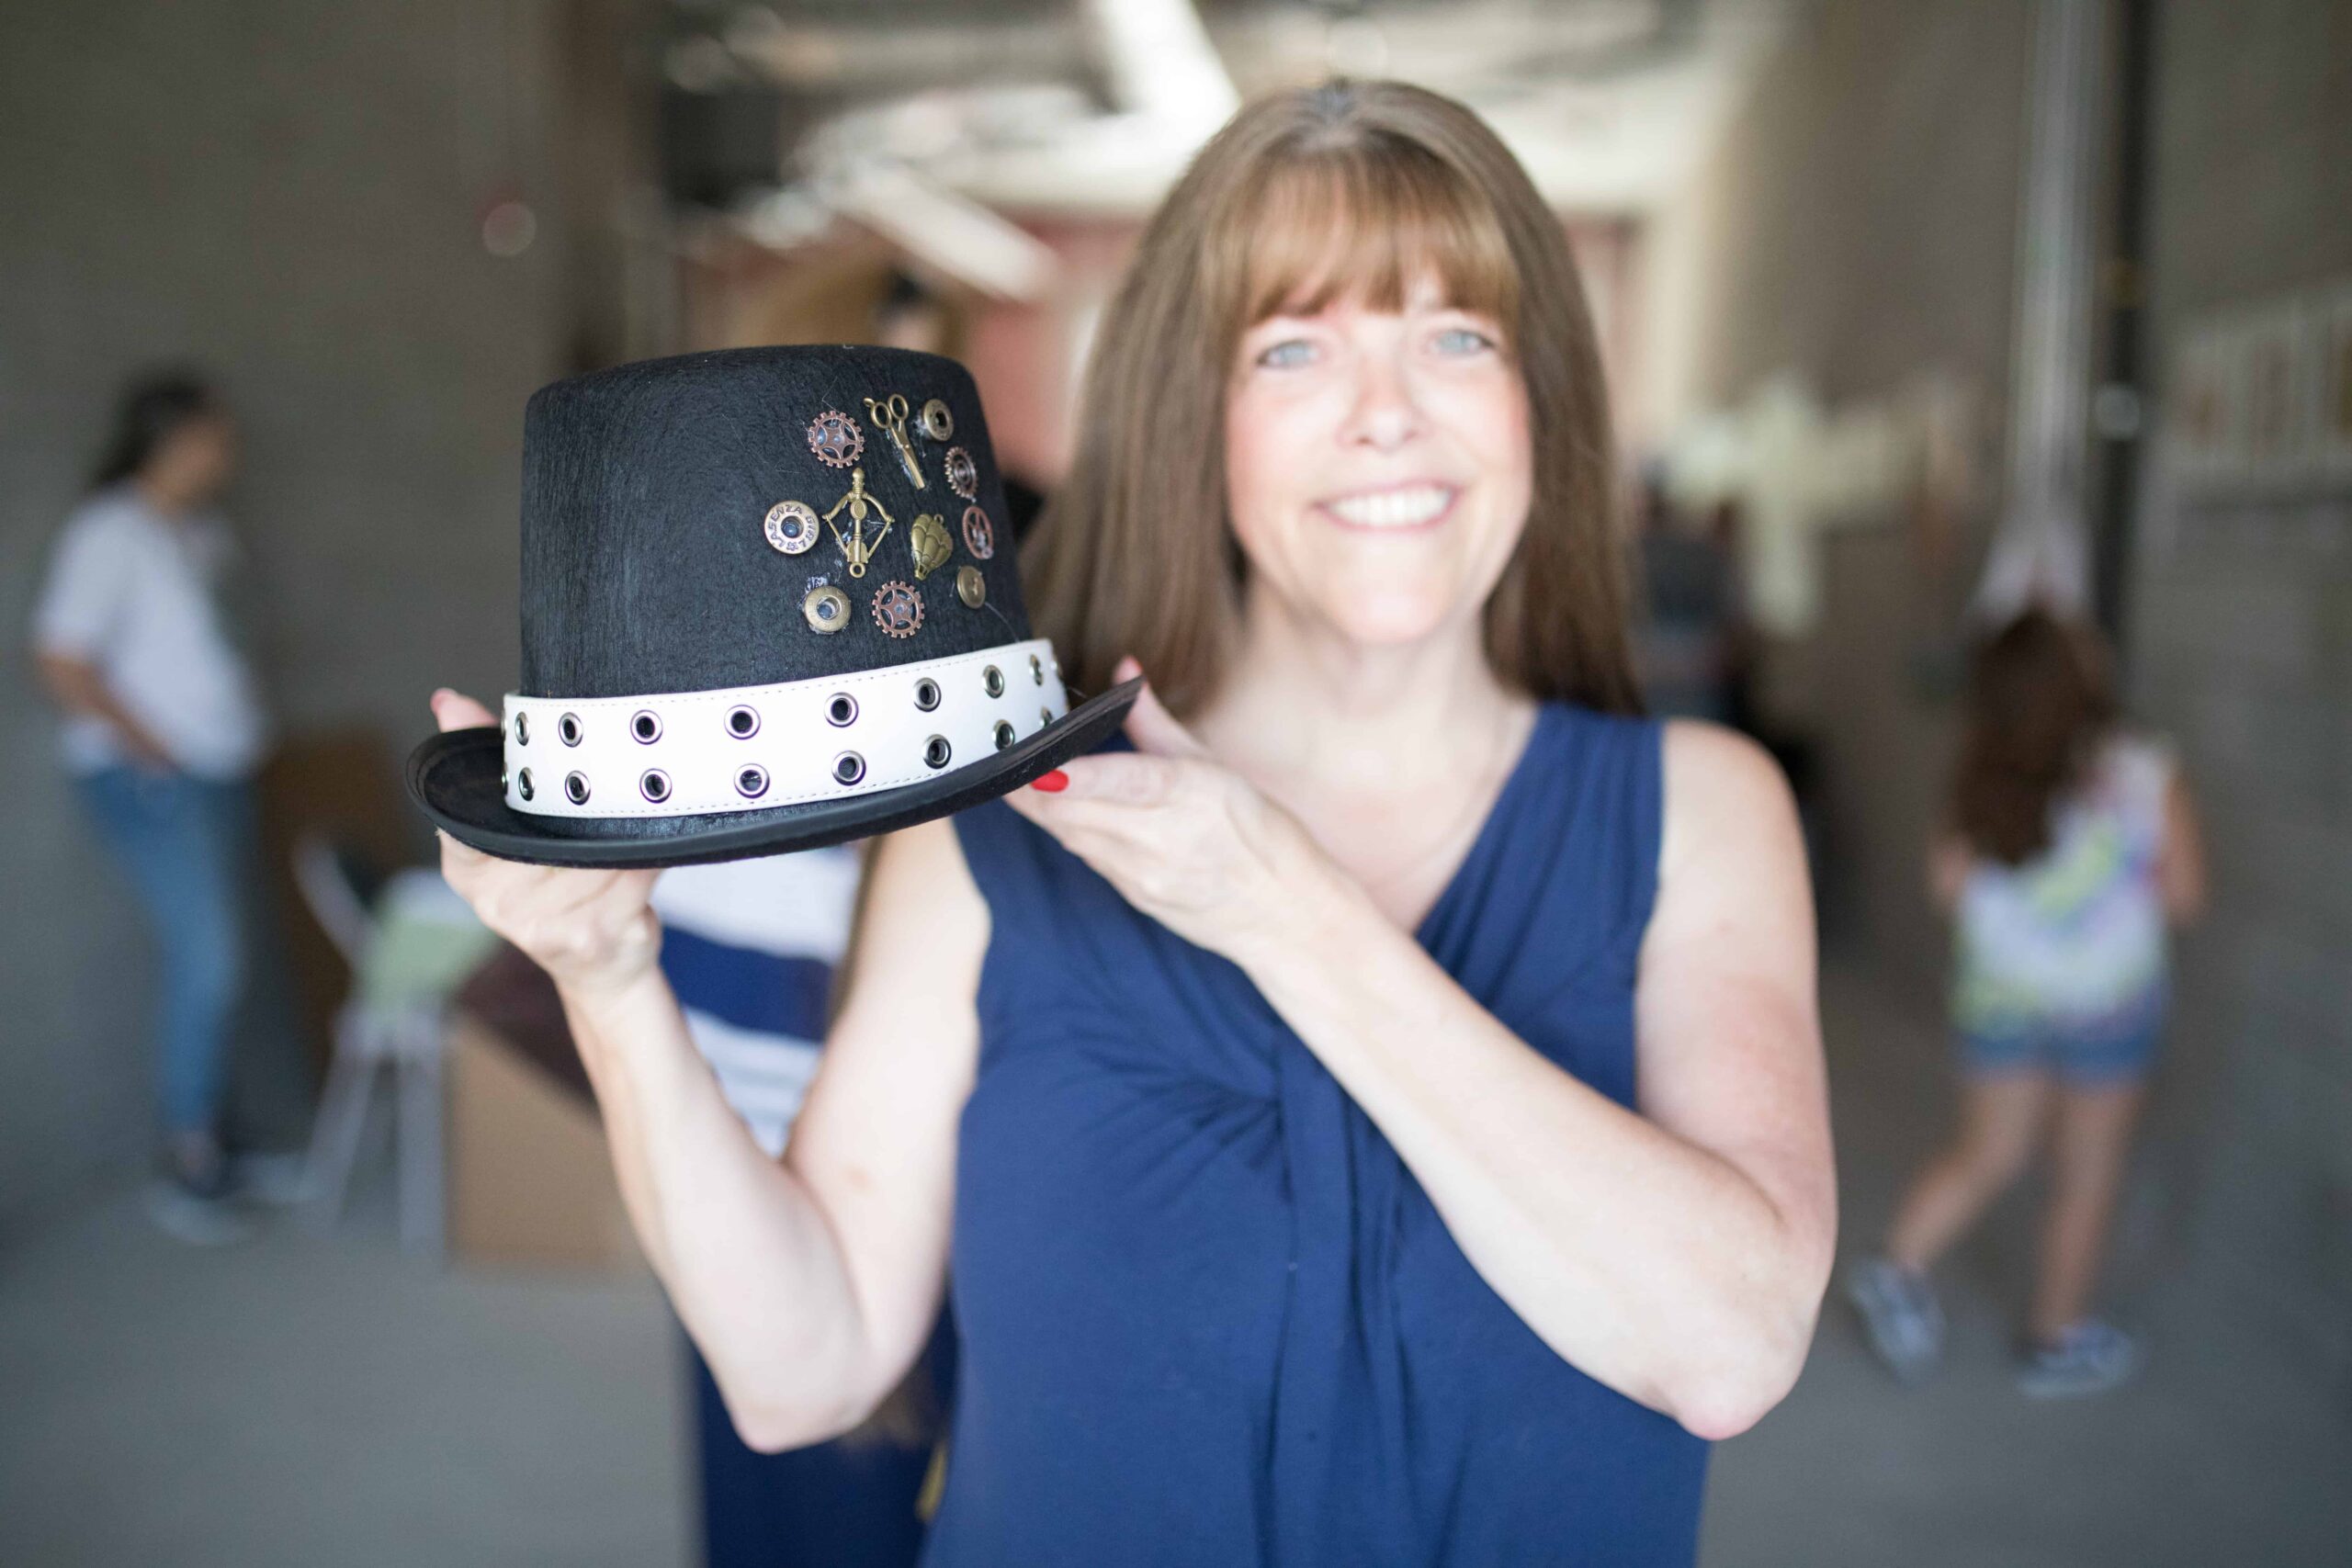 A woman shows off a Steampunk style tophat.